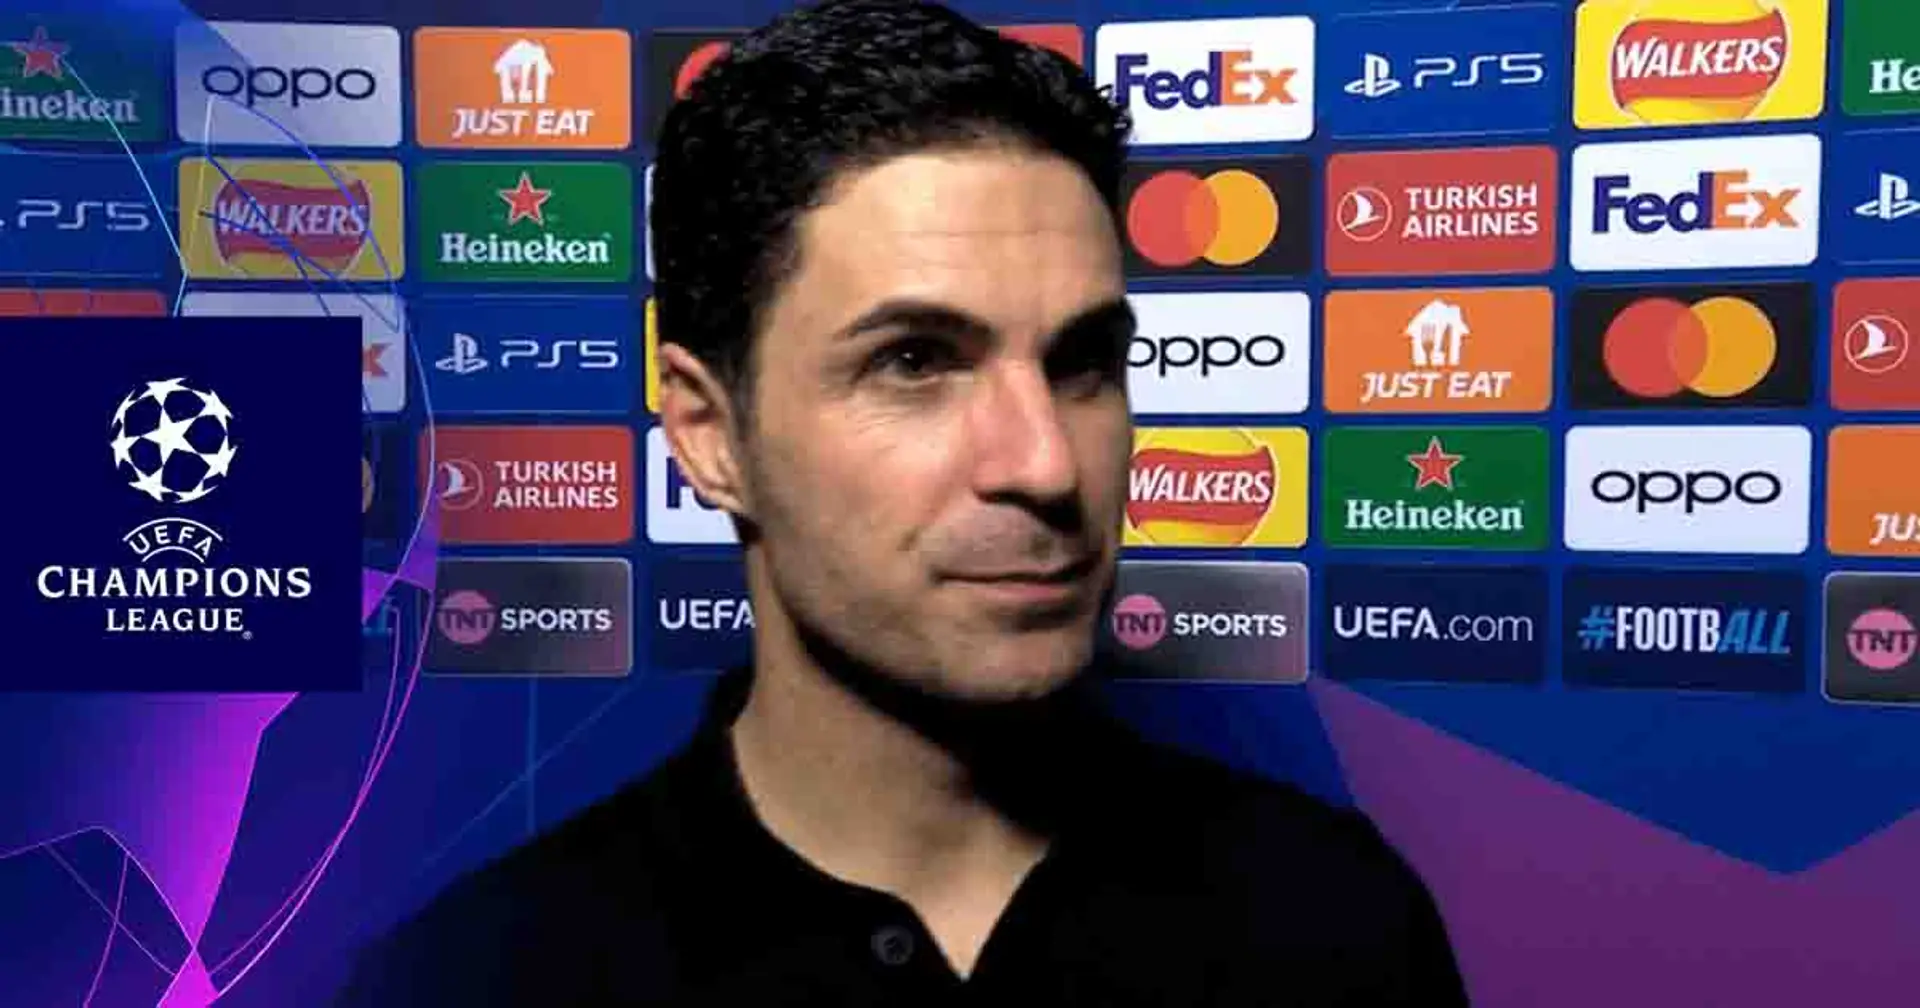 Arteta upbeat after Bayern draw: 'We can go to Allianz Arena and beat them'